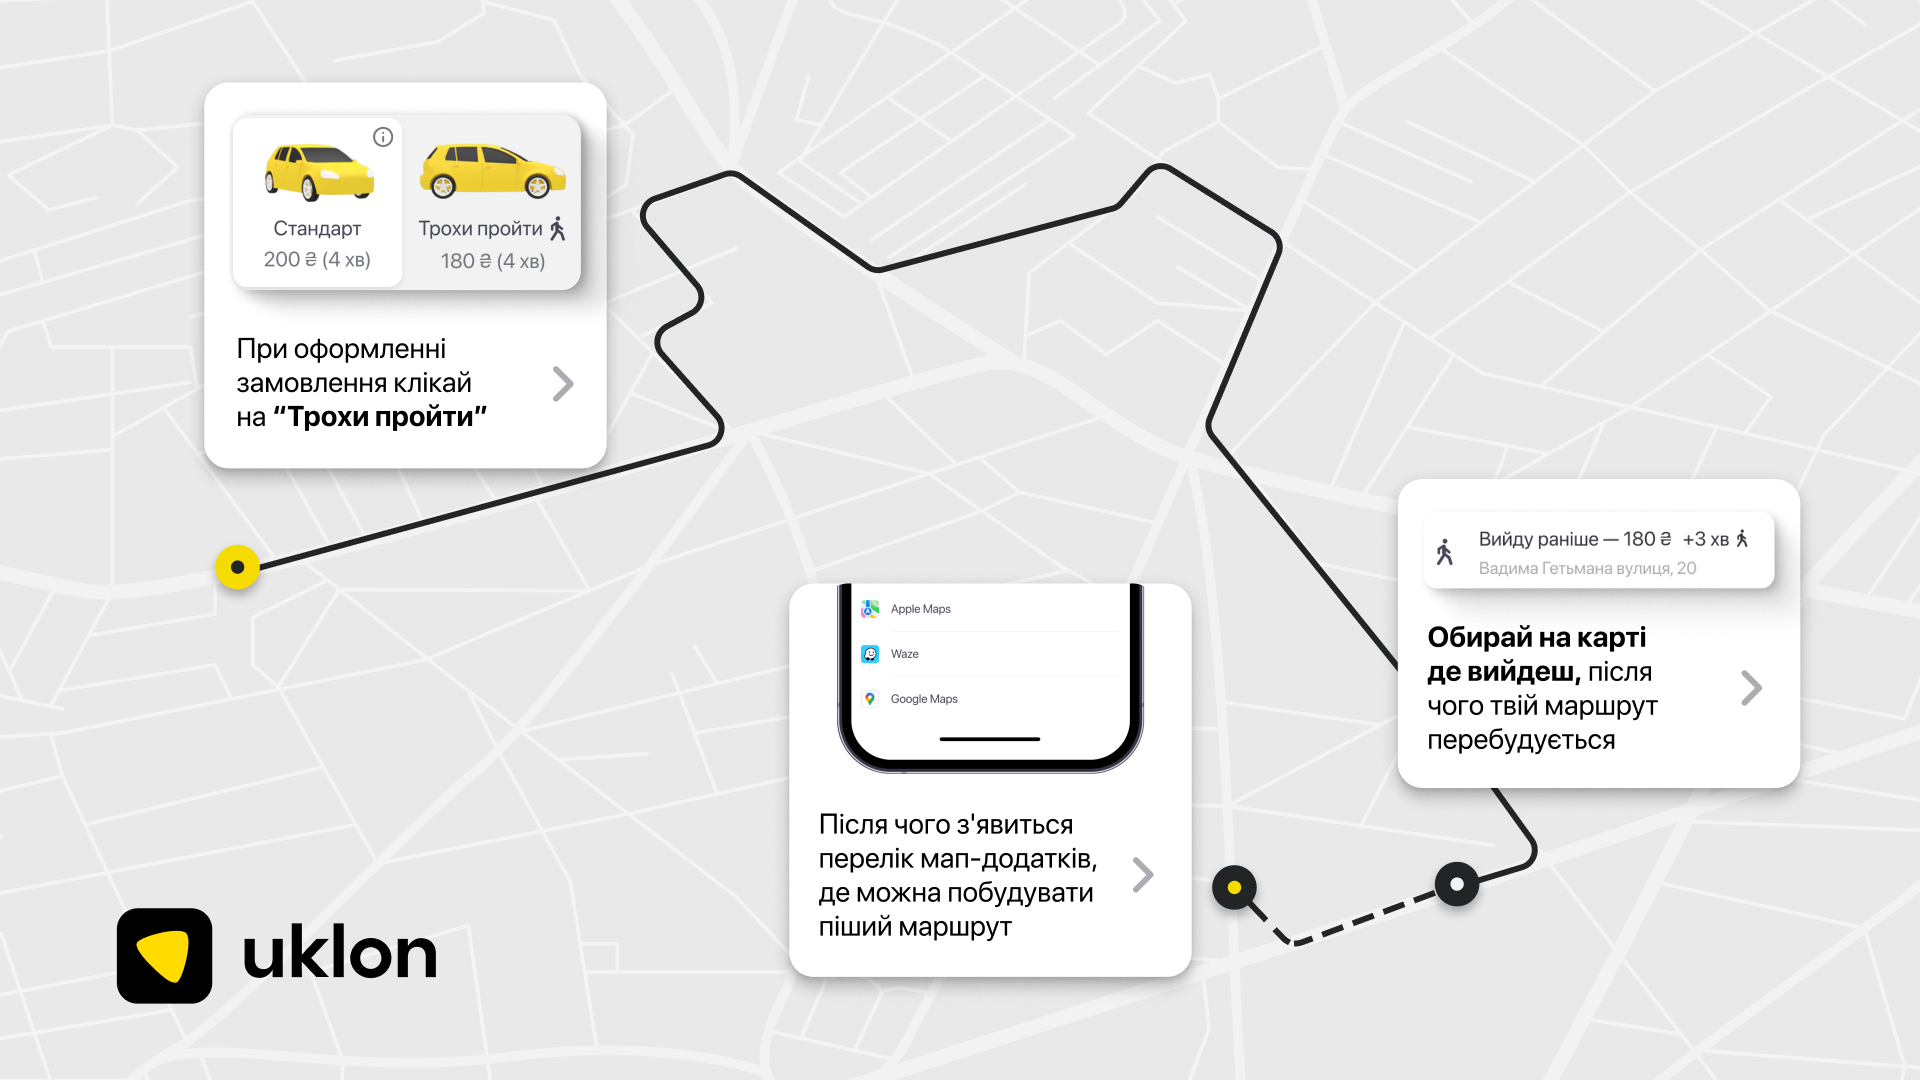 Uklon launched routes with a walking part - they are cheaper and faster than regular trips.